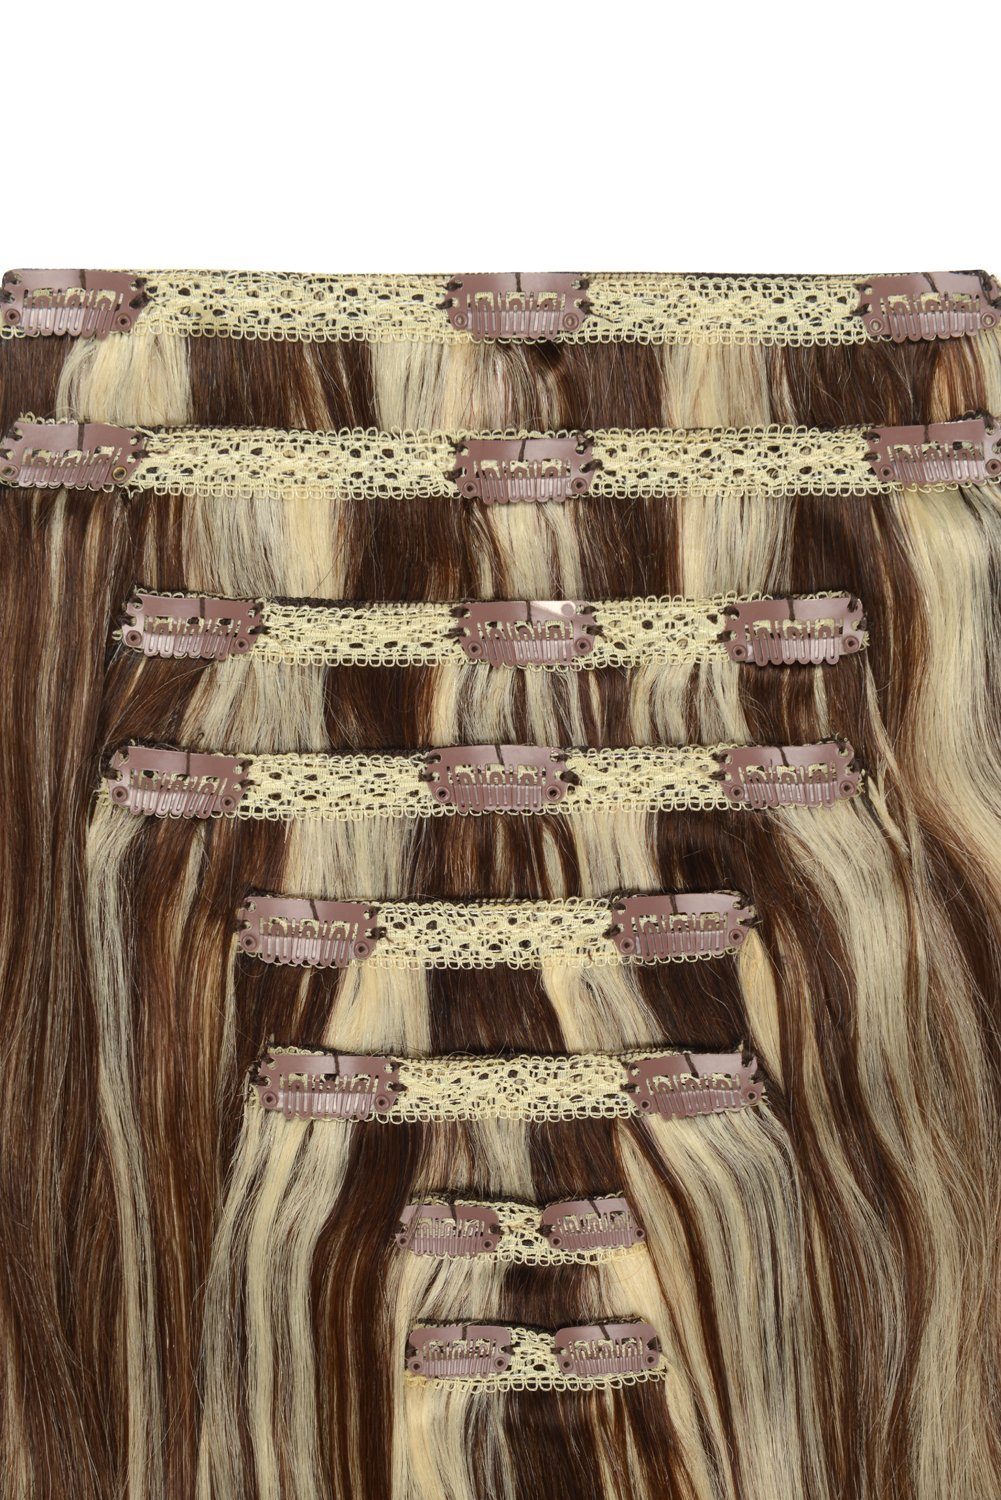 Double Wefted Full Head Remy Clip in Human Hair Extensions - Medium Brown/Bleach Blonde Mix (#4/613) Double wefted full head cliphair 